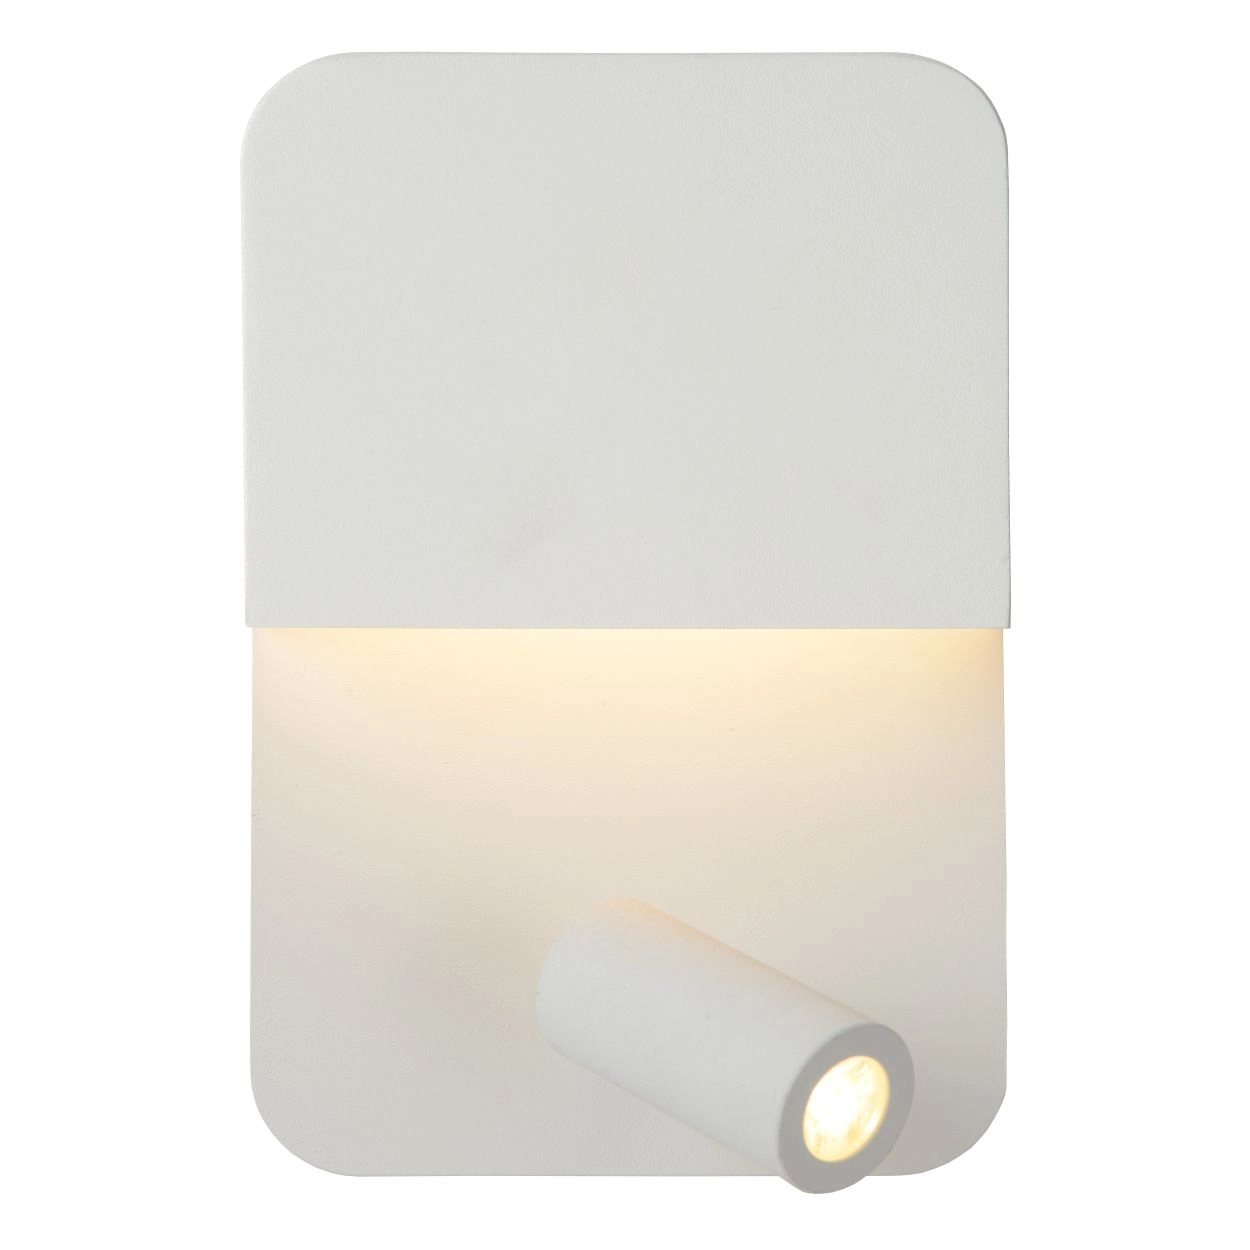 LU 79200/08/31 Lucide BOXER - Wall light - LED - 1x10W 3000K - With USB charging point - White